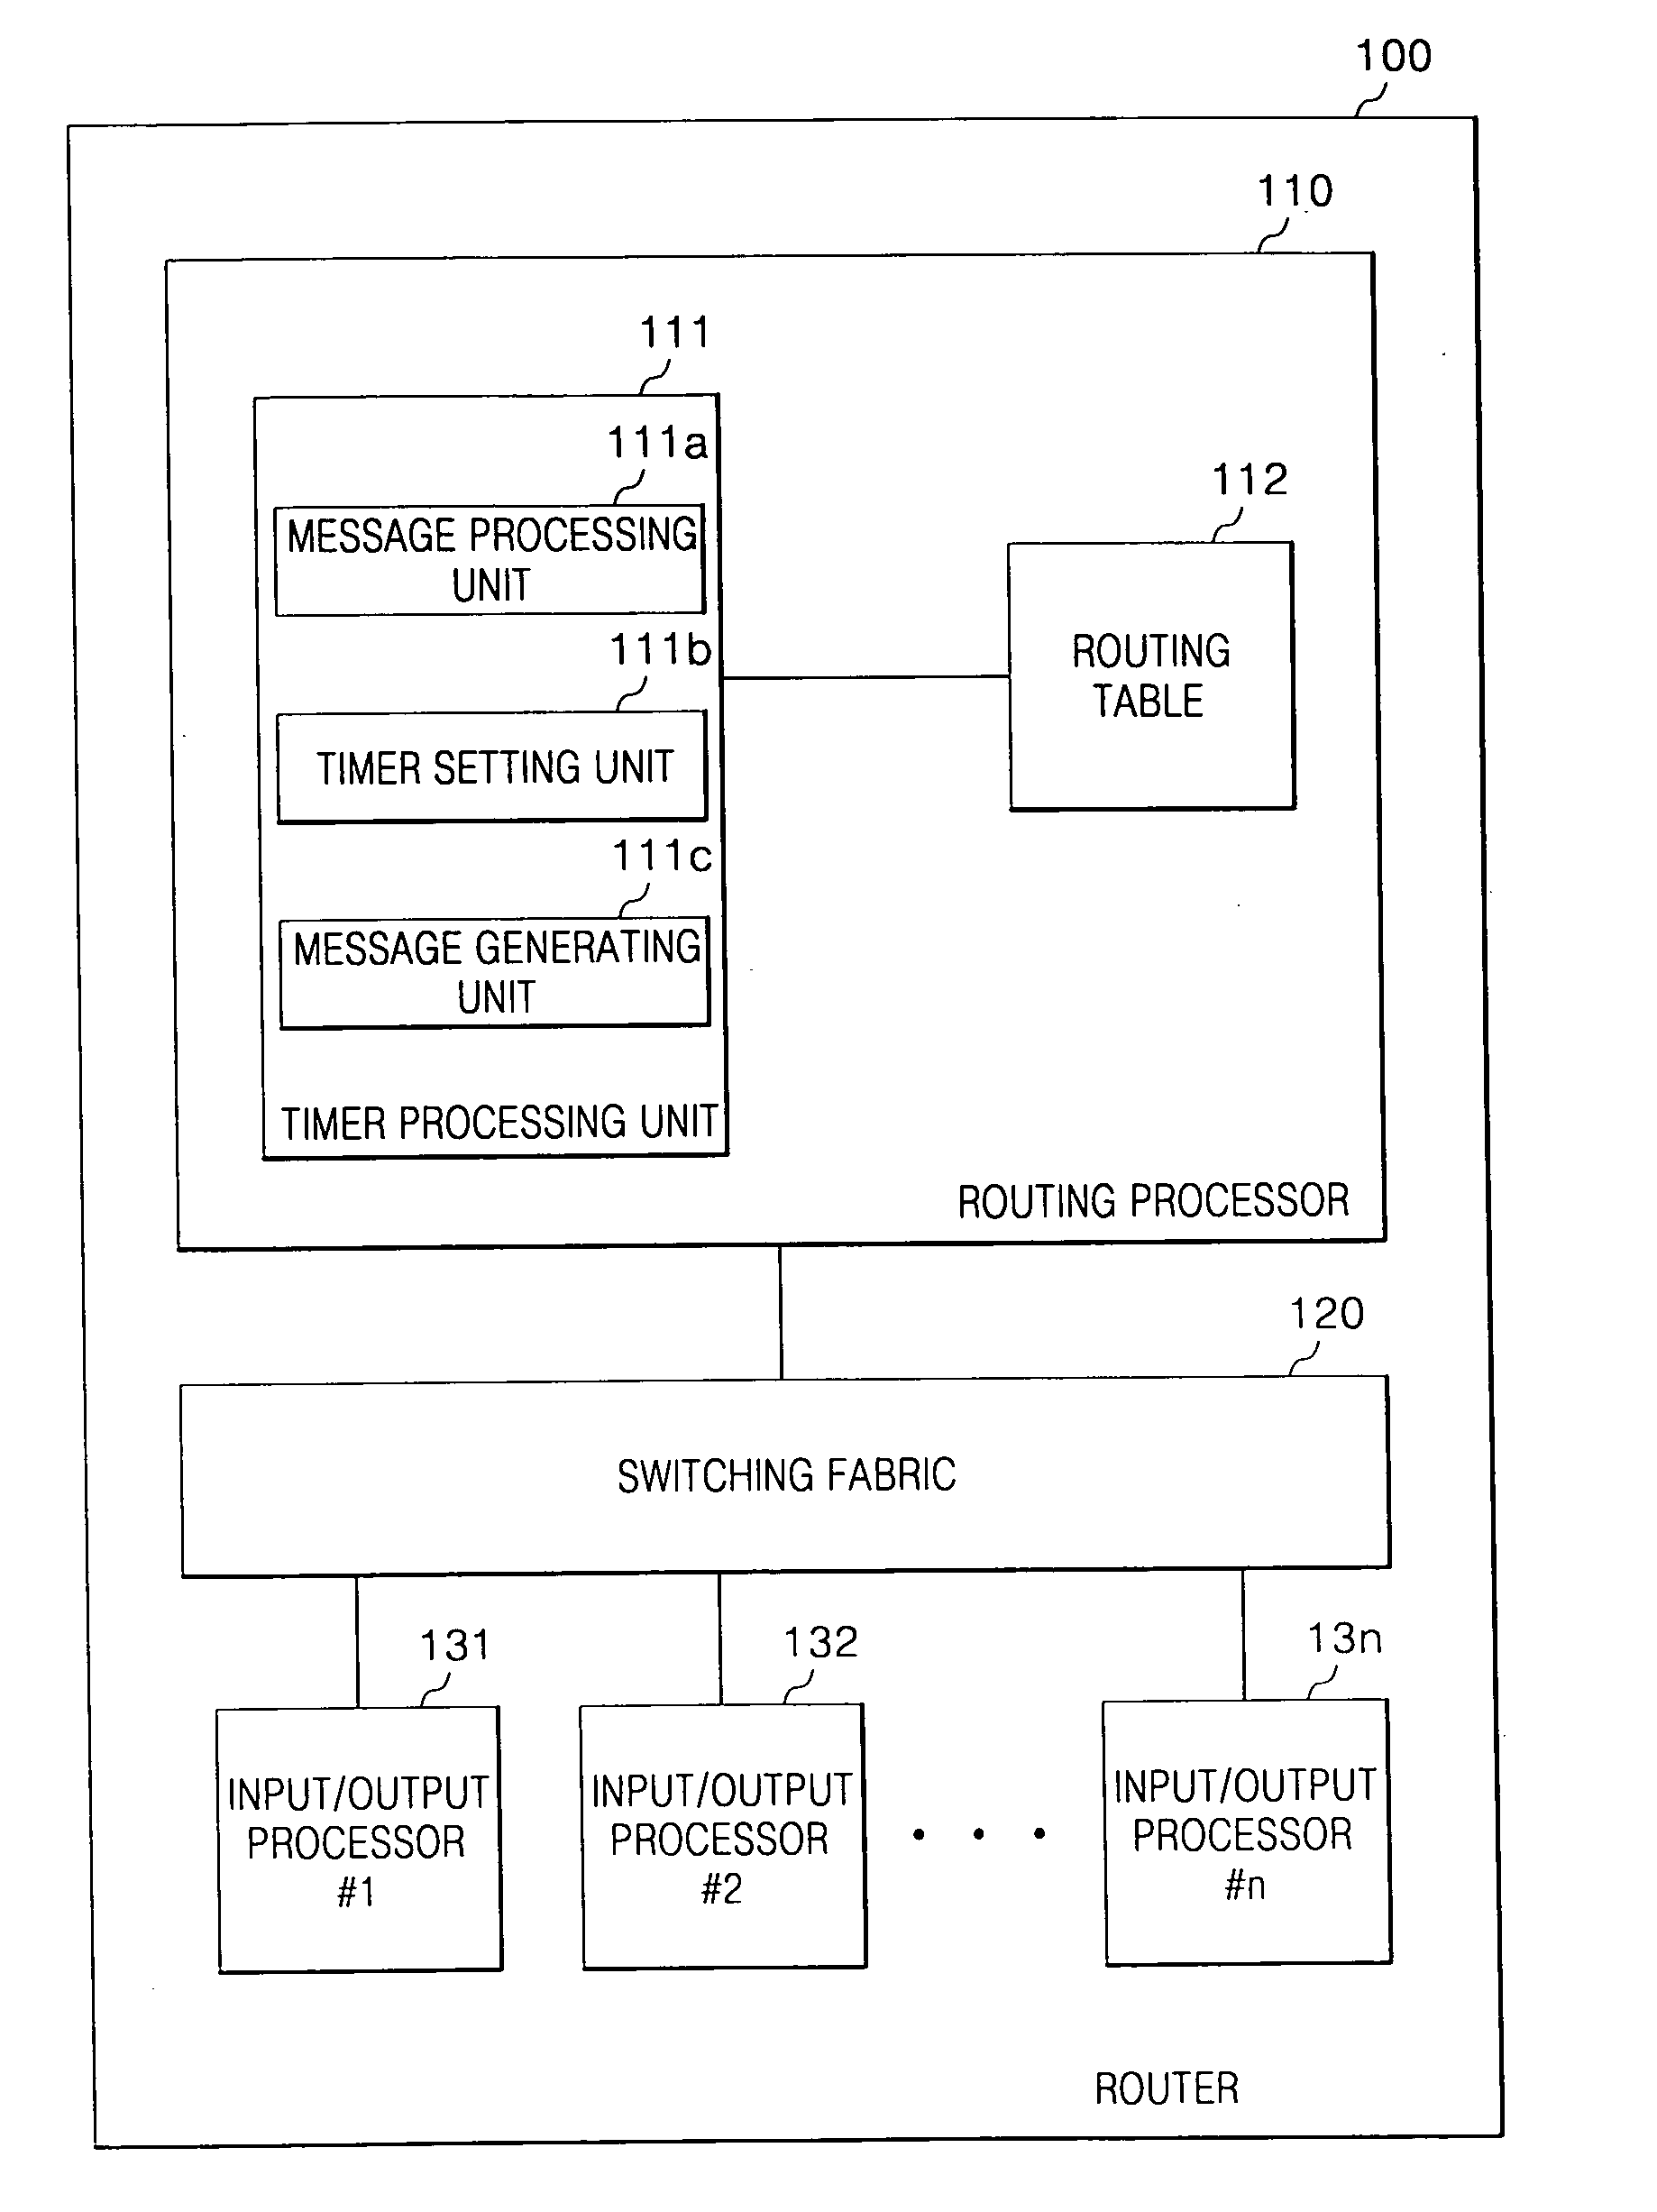 Setting timers of a router